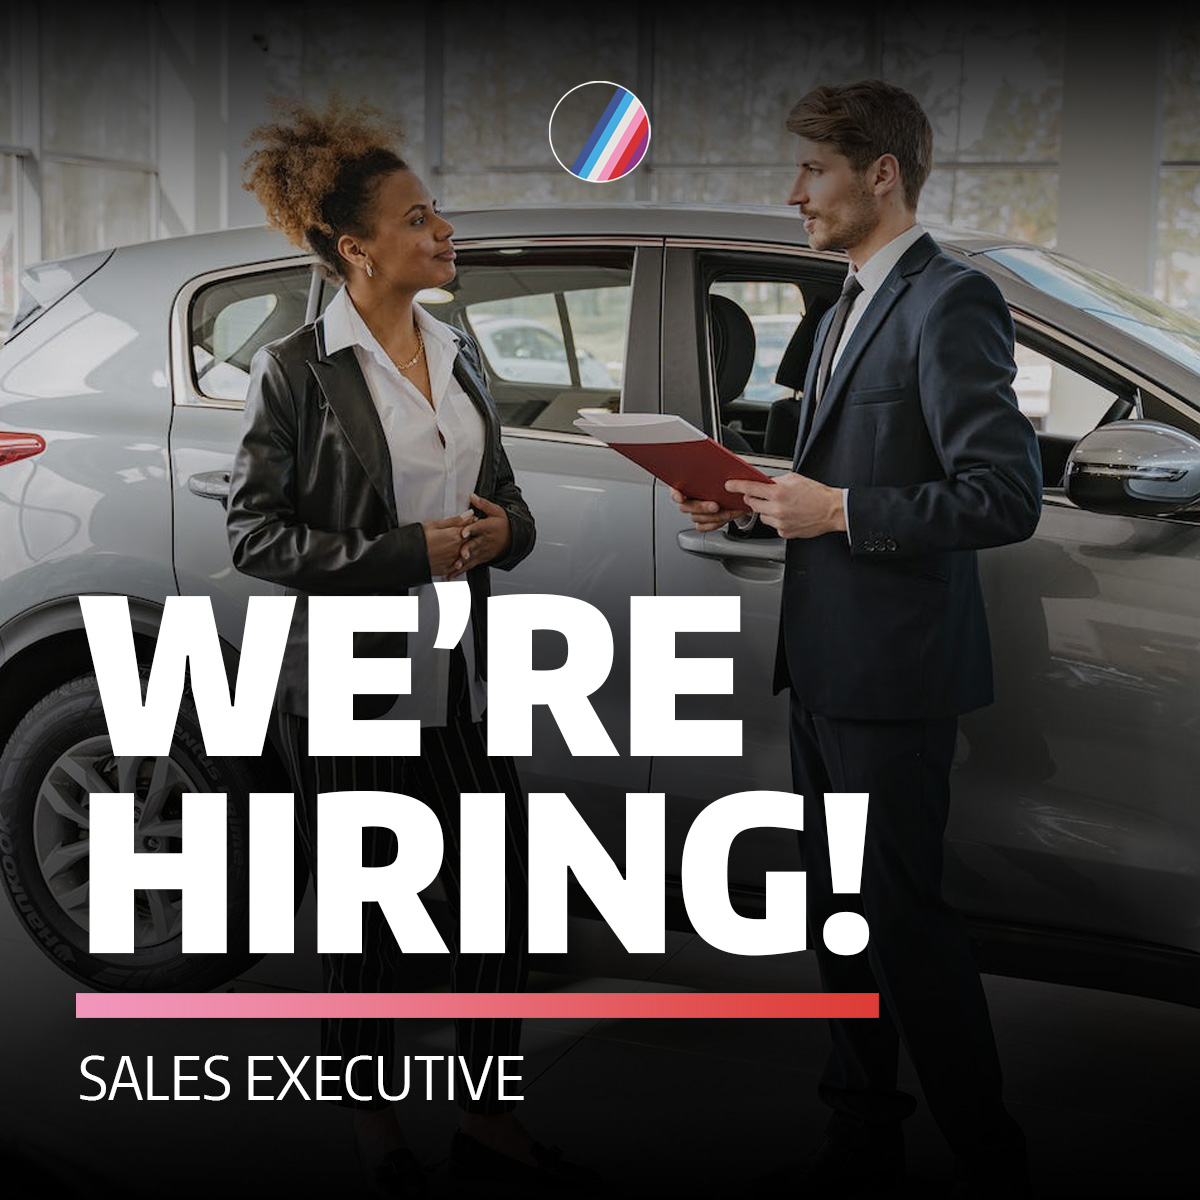 📣 WE'RE HIRING - SALES EXECUTIVE 📣

Are you the best of the best? We're looking for a proven and motivated Sales Executive to join us at our HQ in Ipswich. #IpswichJobs #JobVacancy #SuffolkJobs

For more information and to apply, please email carly@integrityautomotive.co.uk